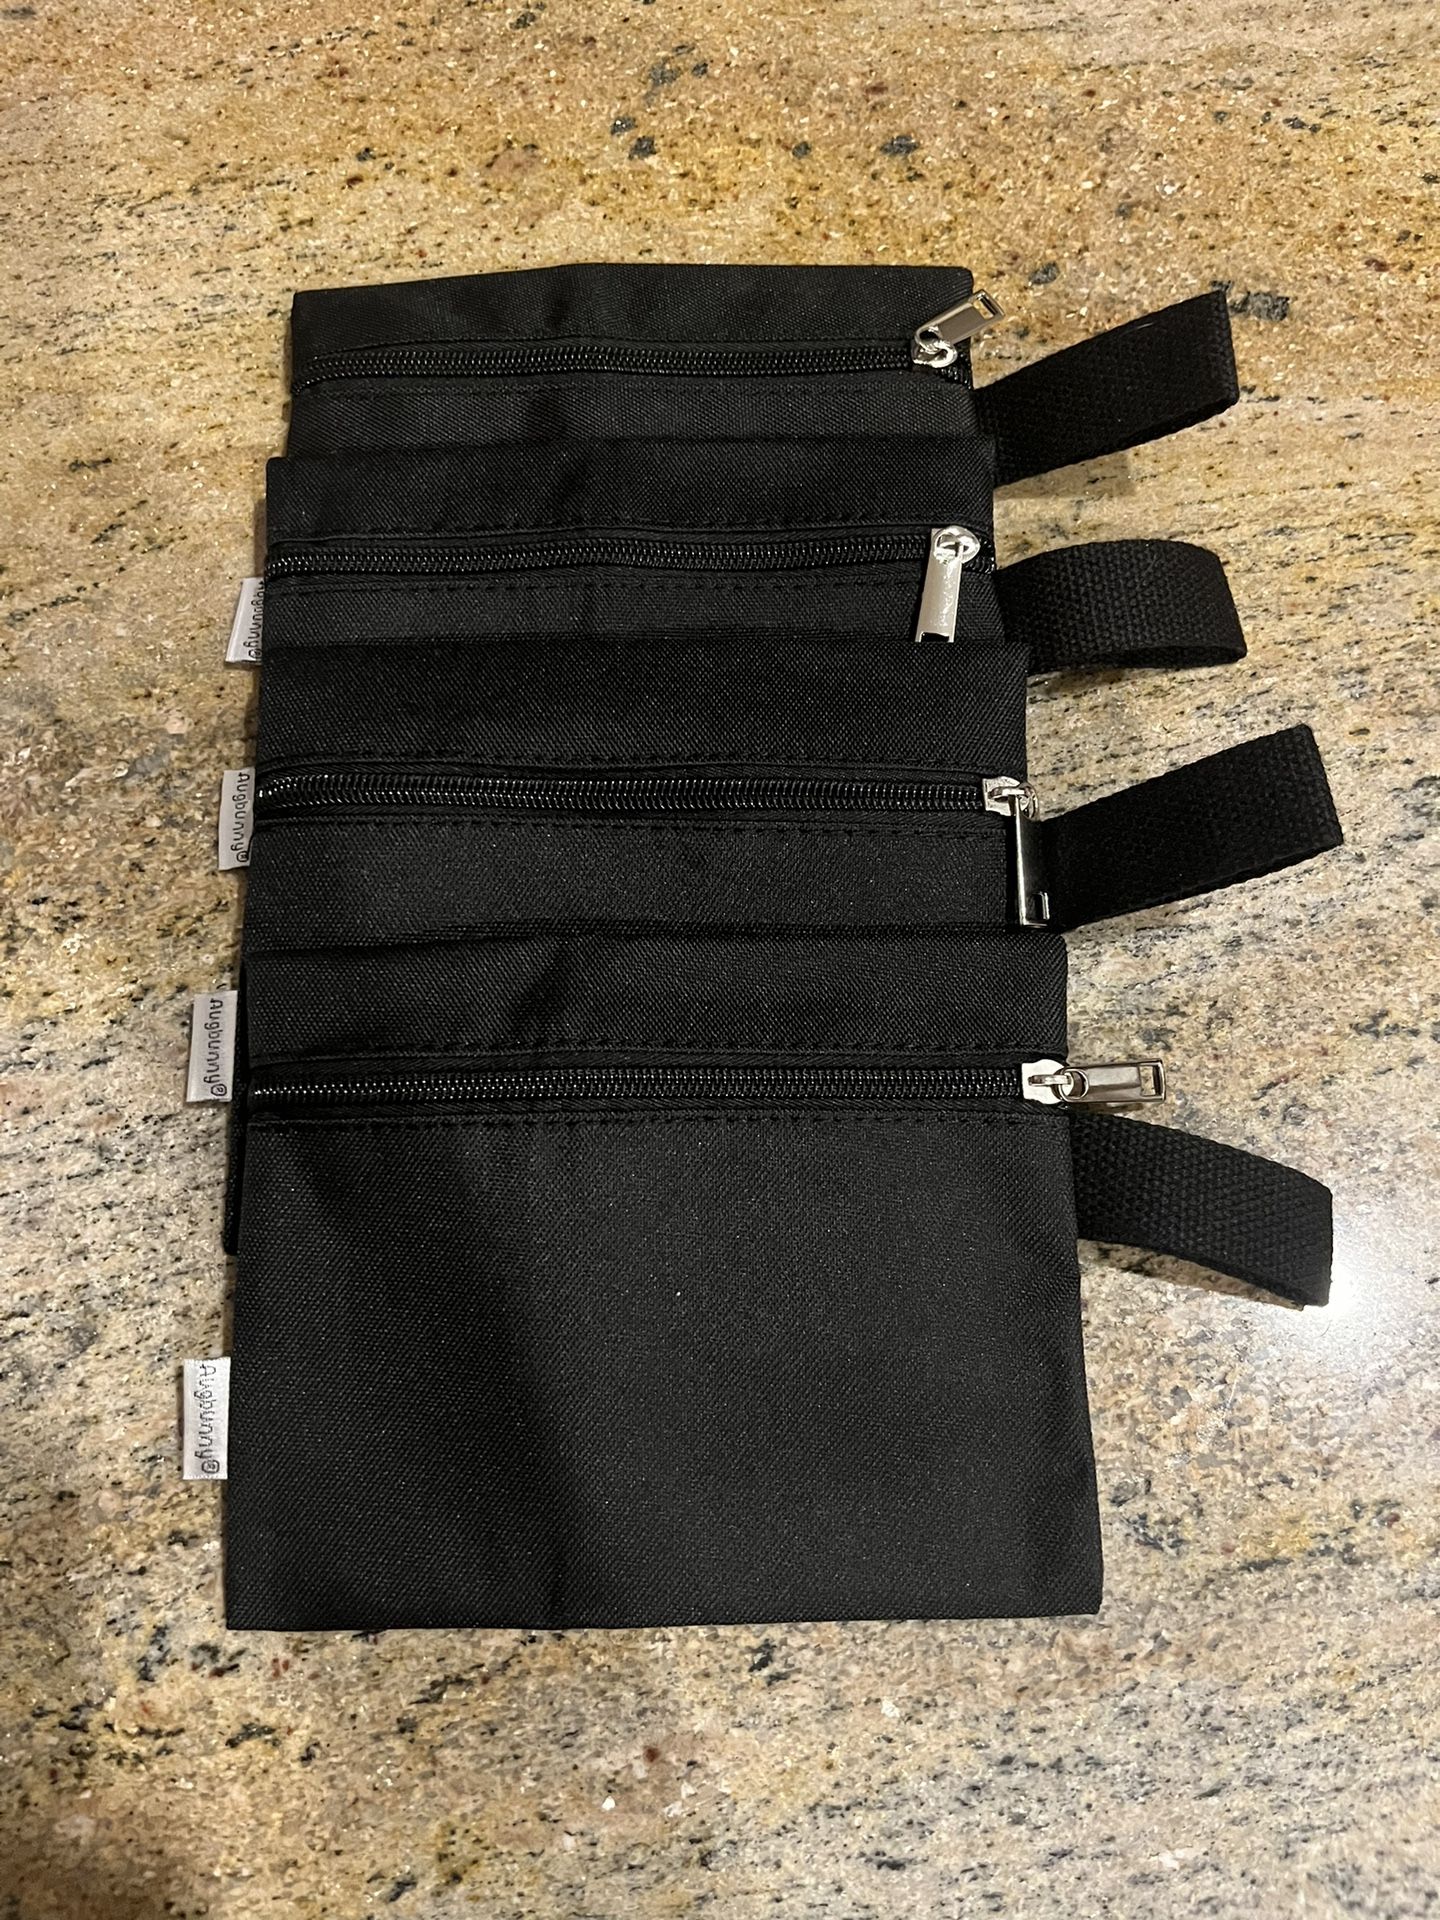 Black small carry bags